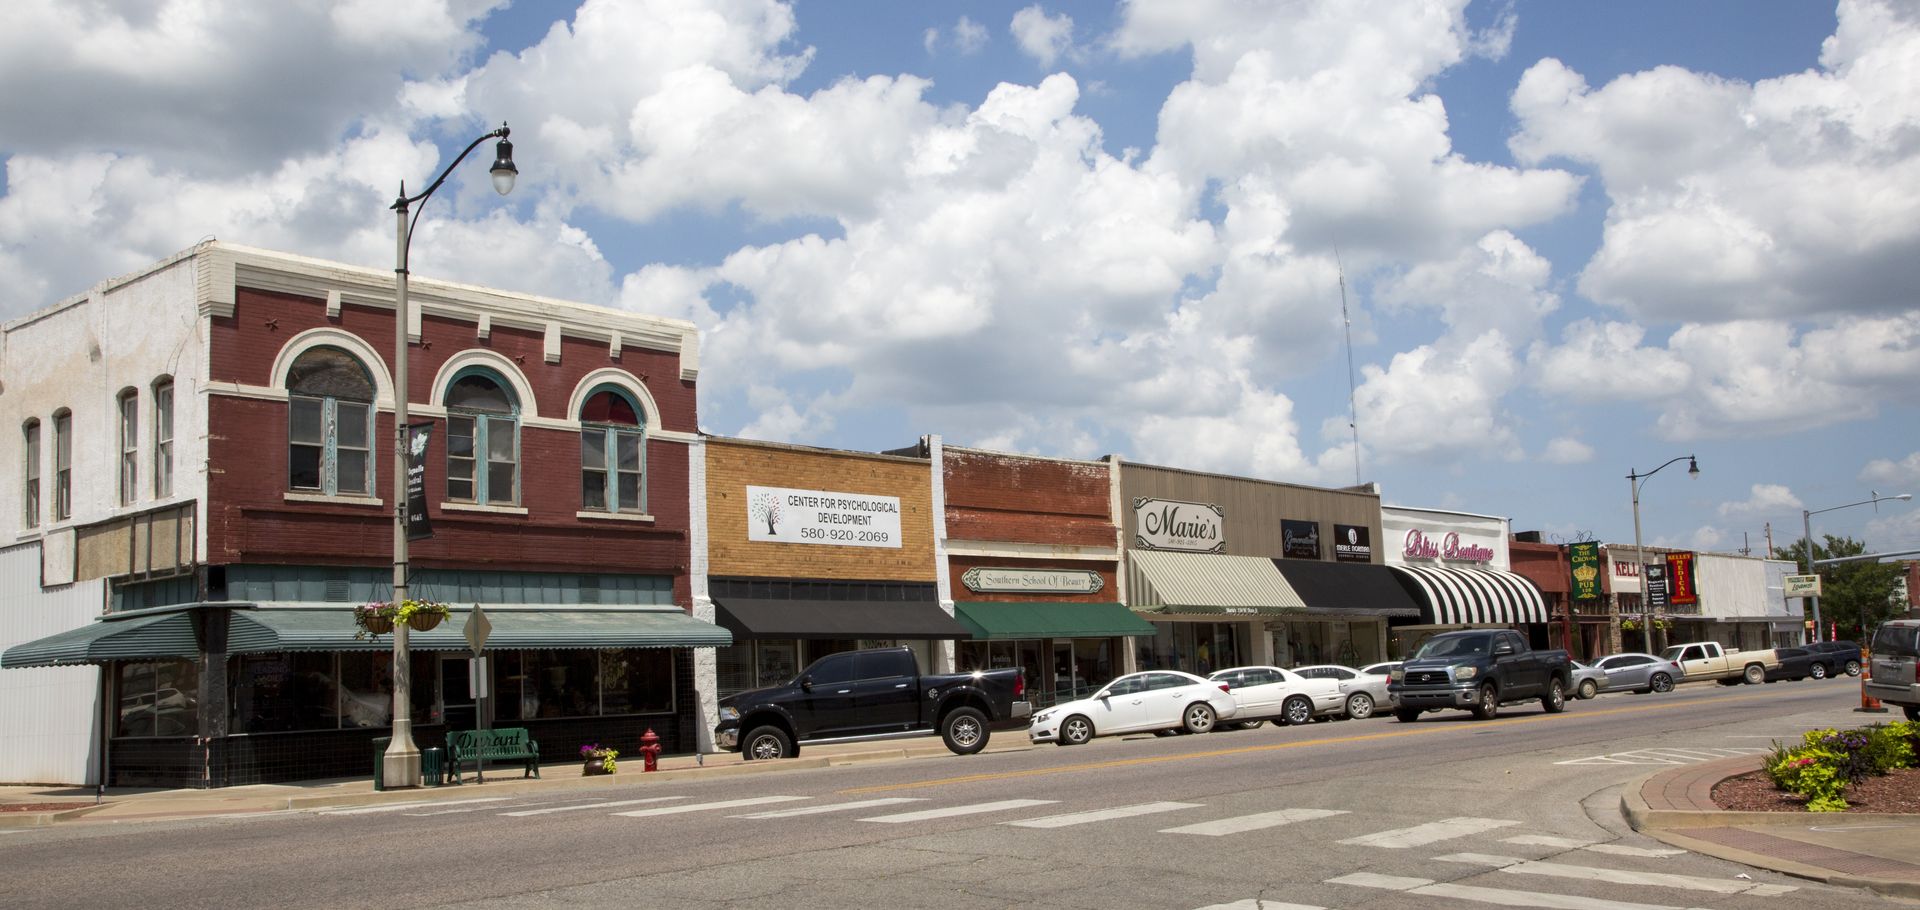 City of Durant Oklahoma's Official Travel & Tourism Site